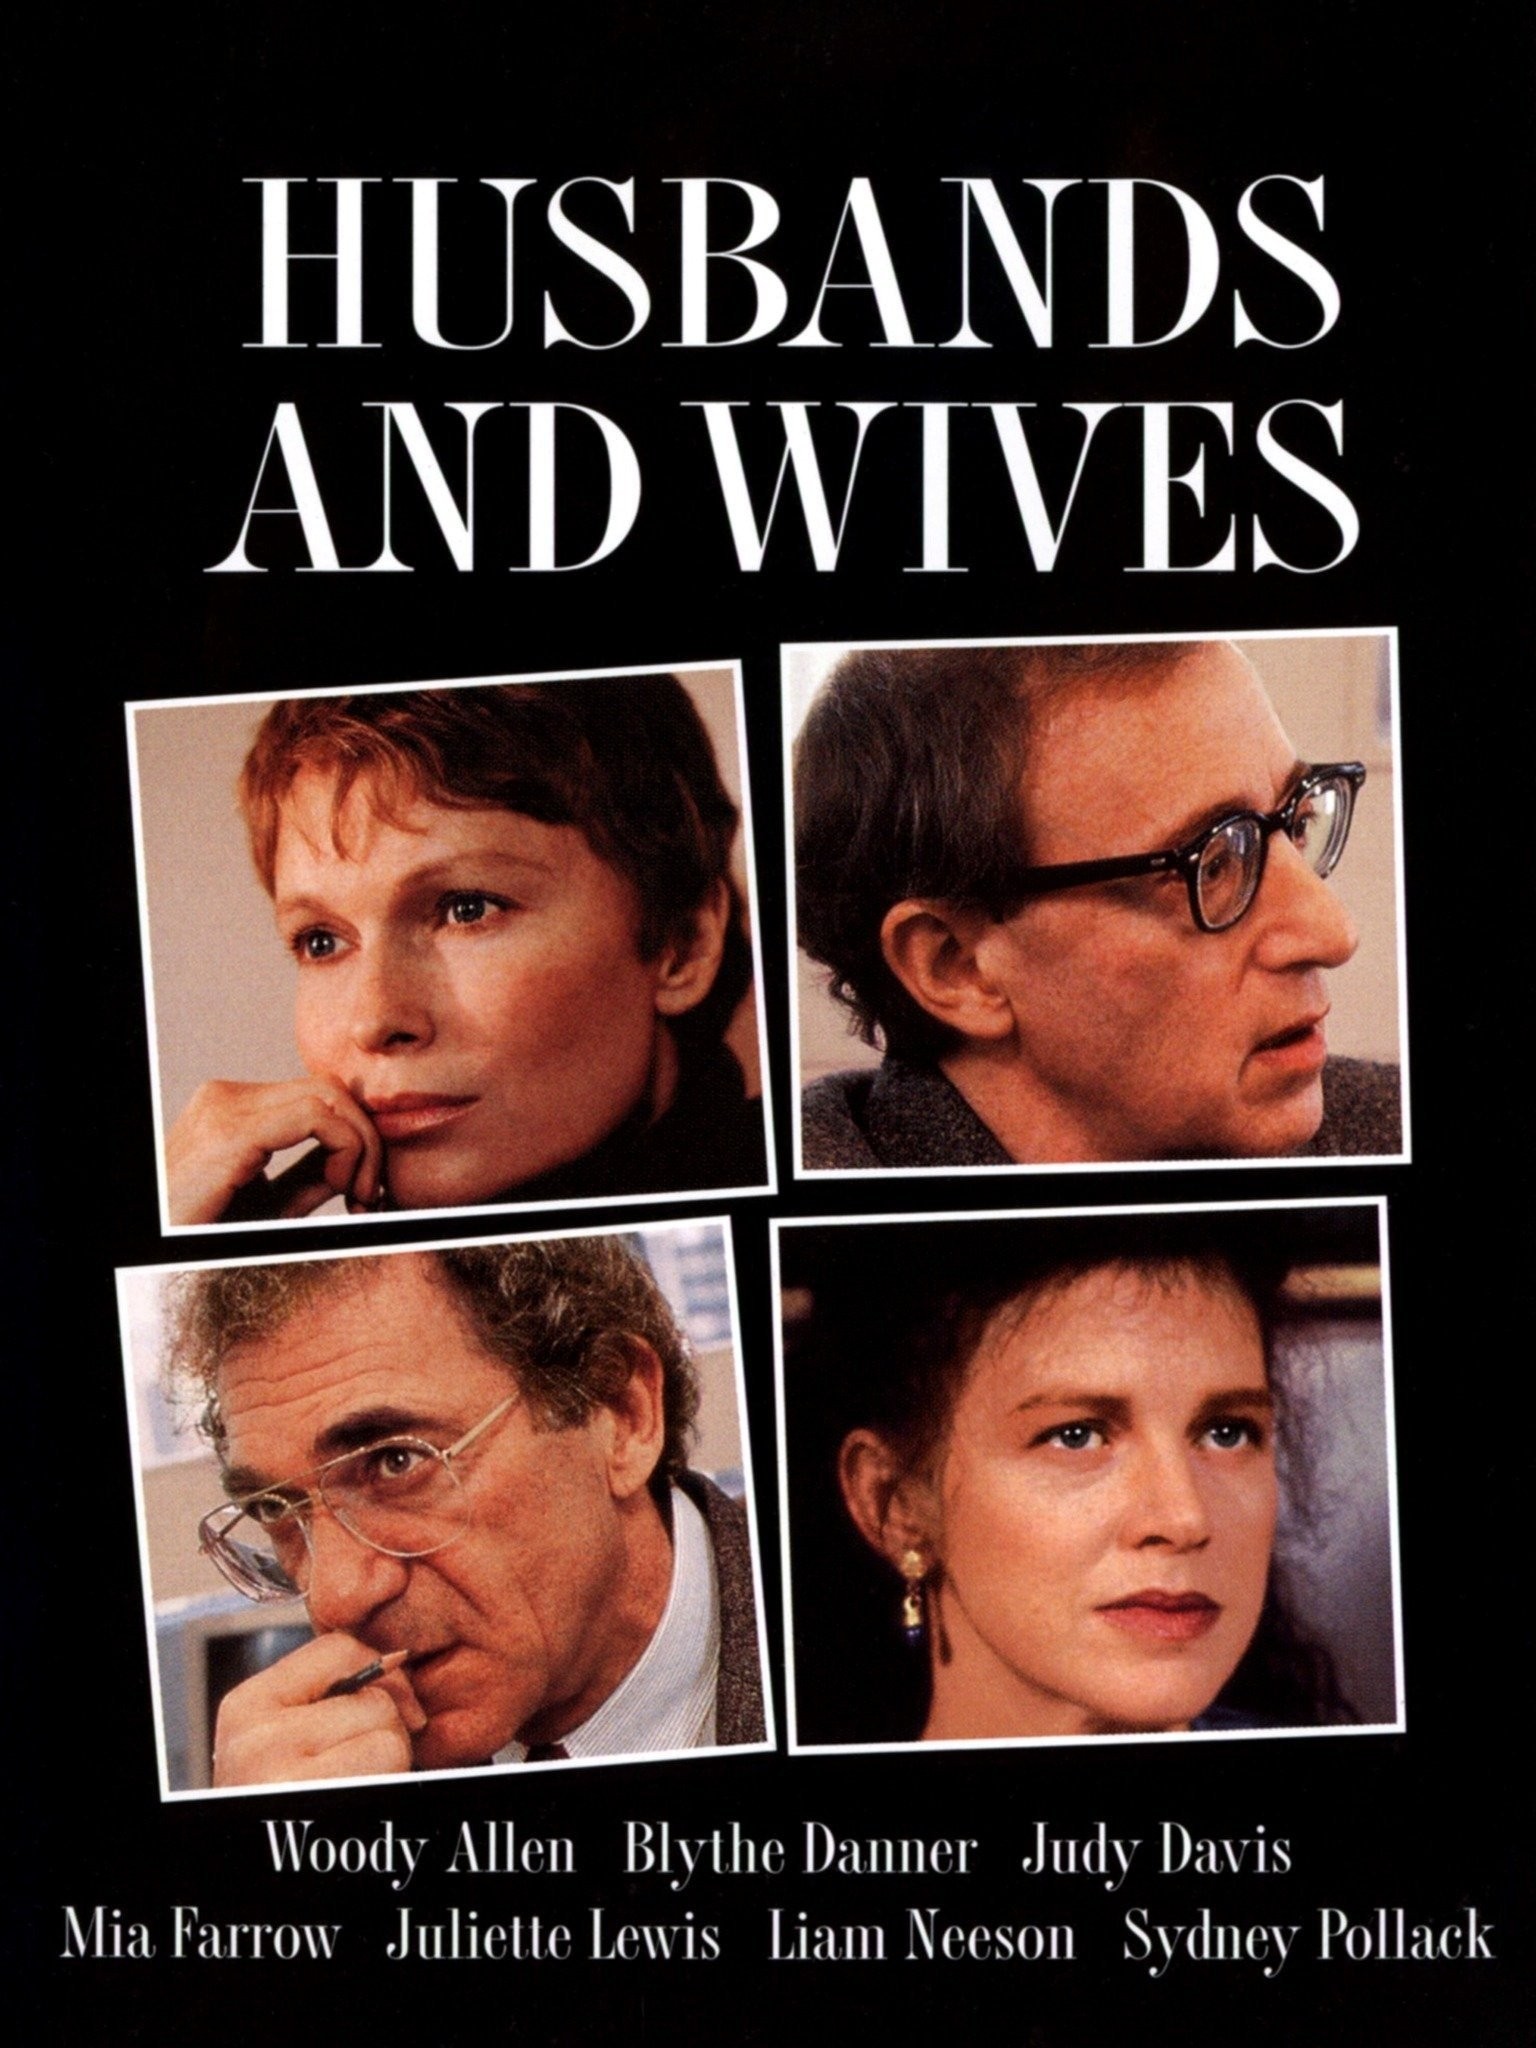 Husband and wives 1992 movie sex scene